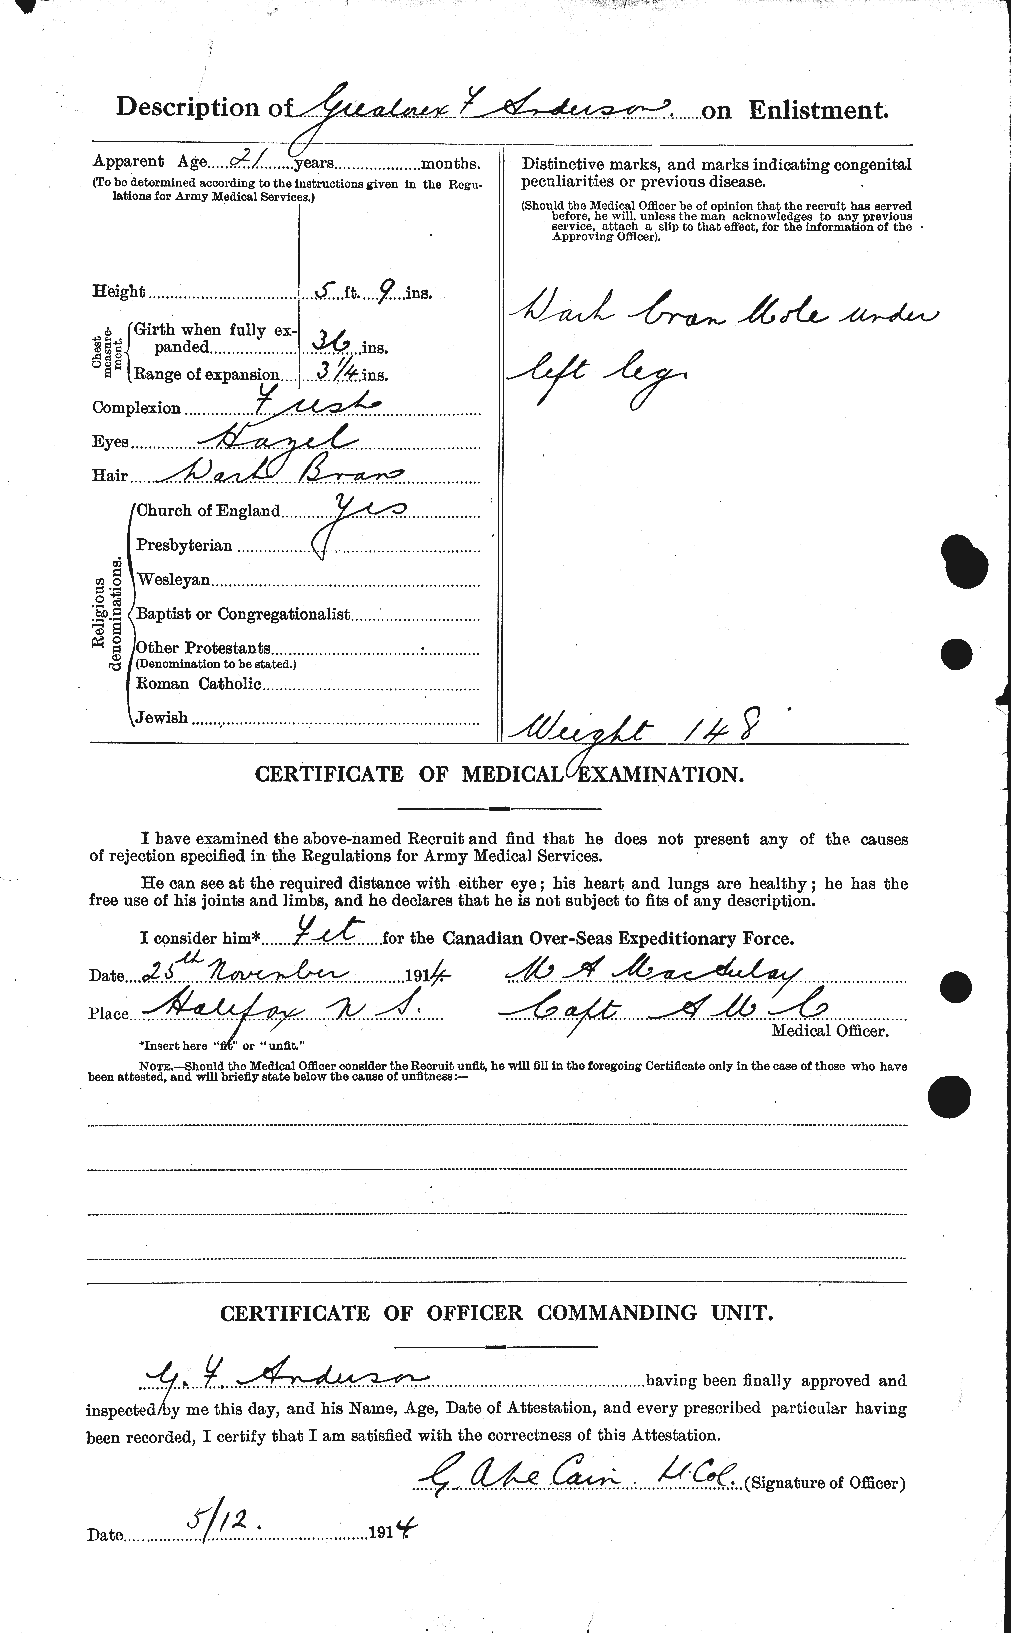 Personnel Records of the First World War - CEF 209658b